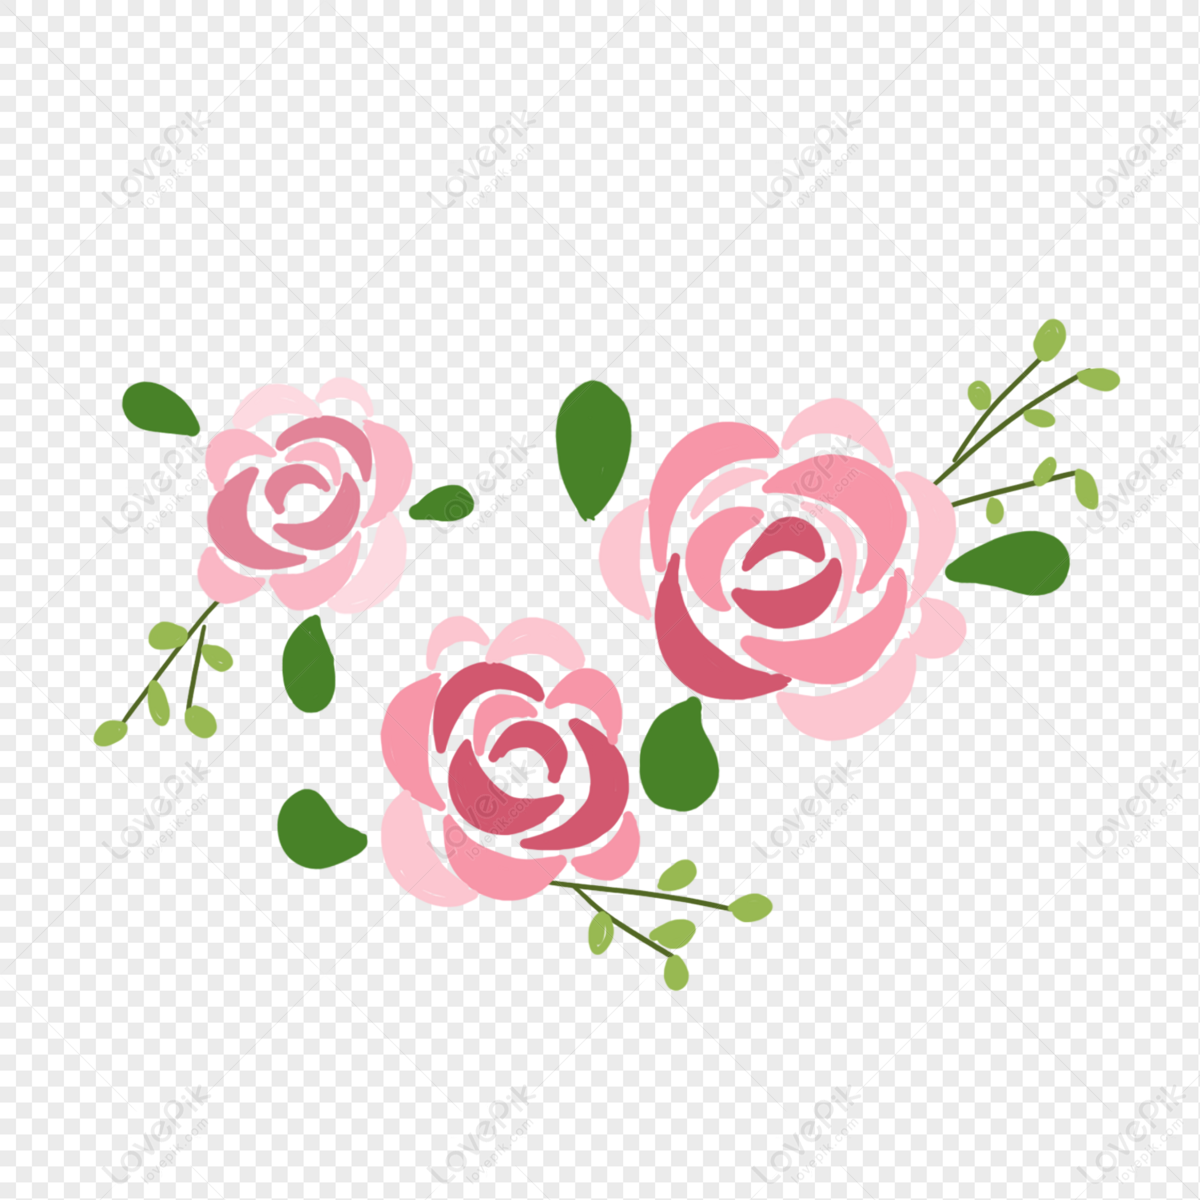 Pink Rose Flower PNG Image And Clipart Image For Free Download - Lovepik |  401456398